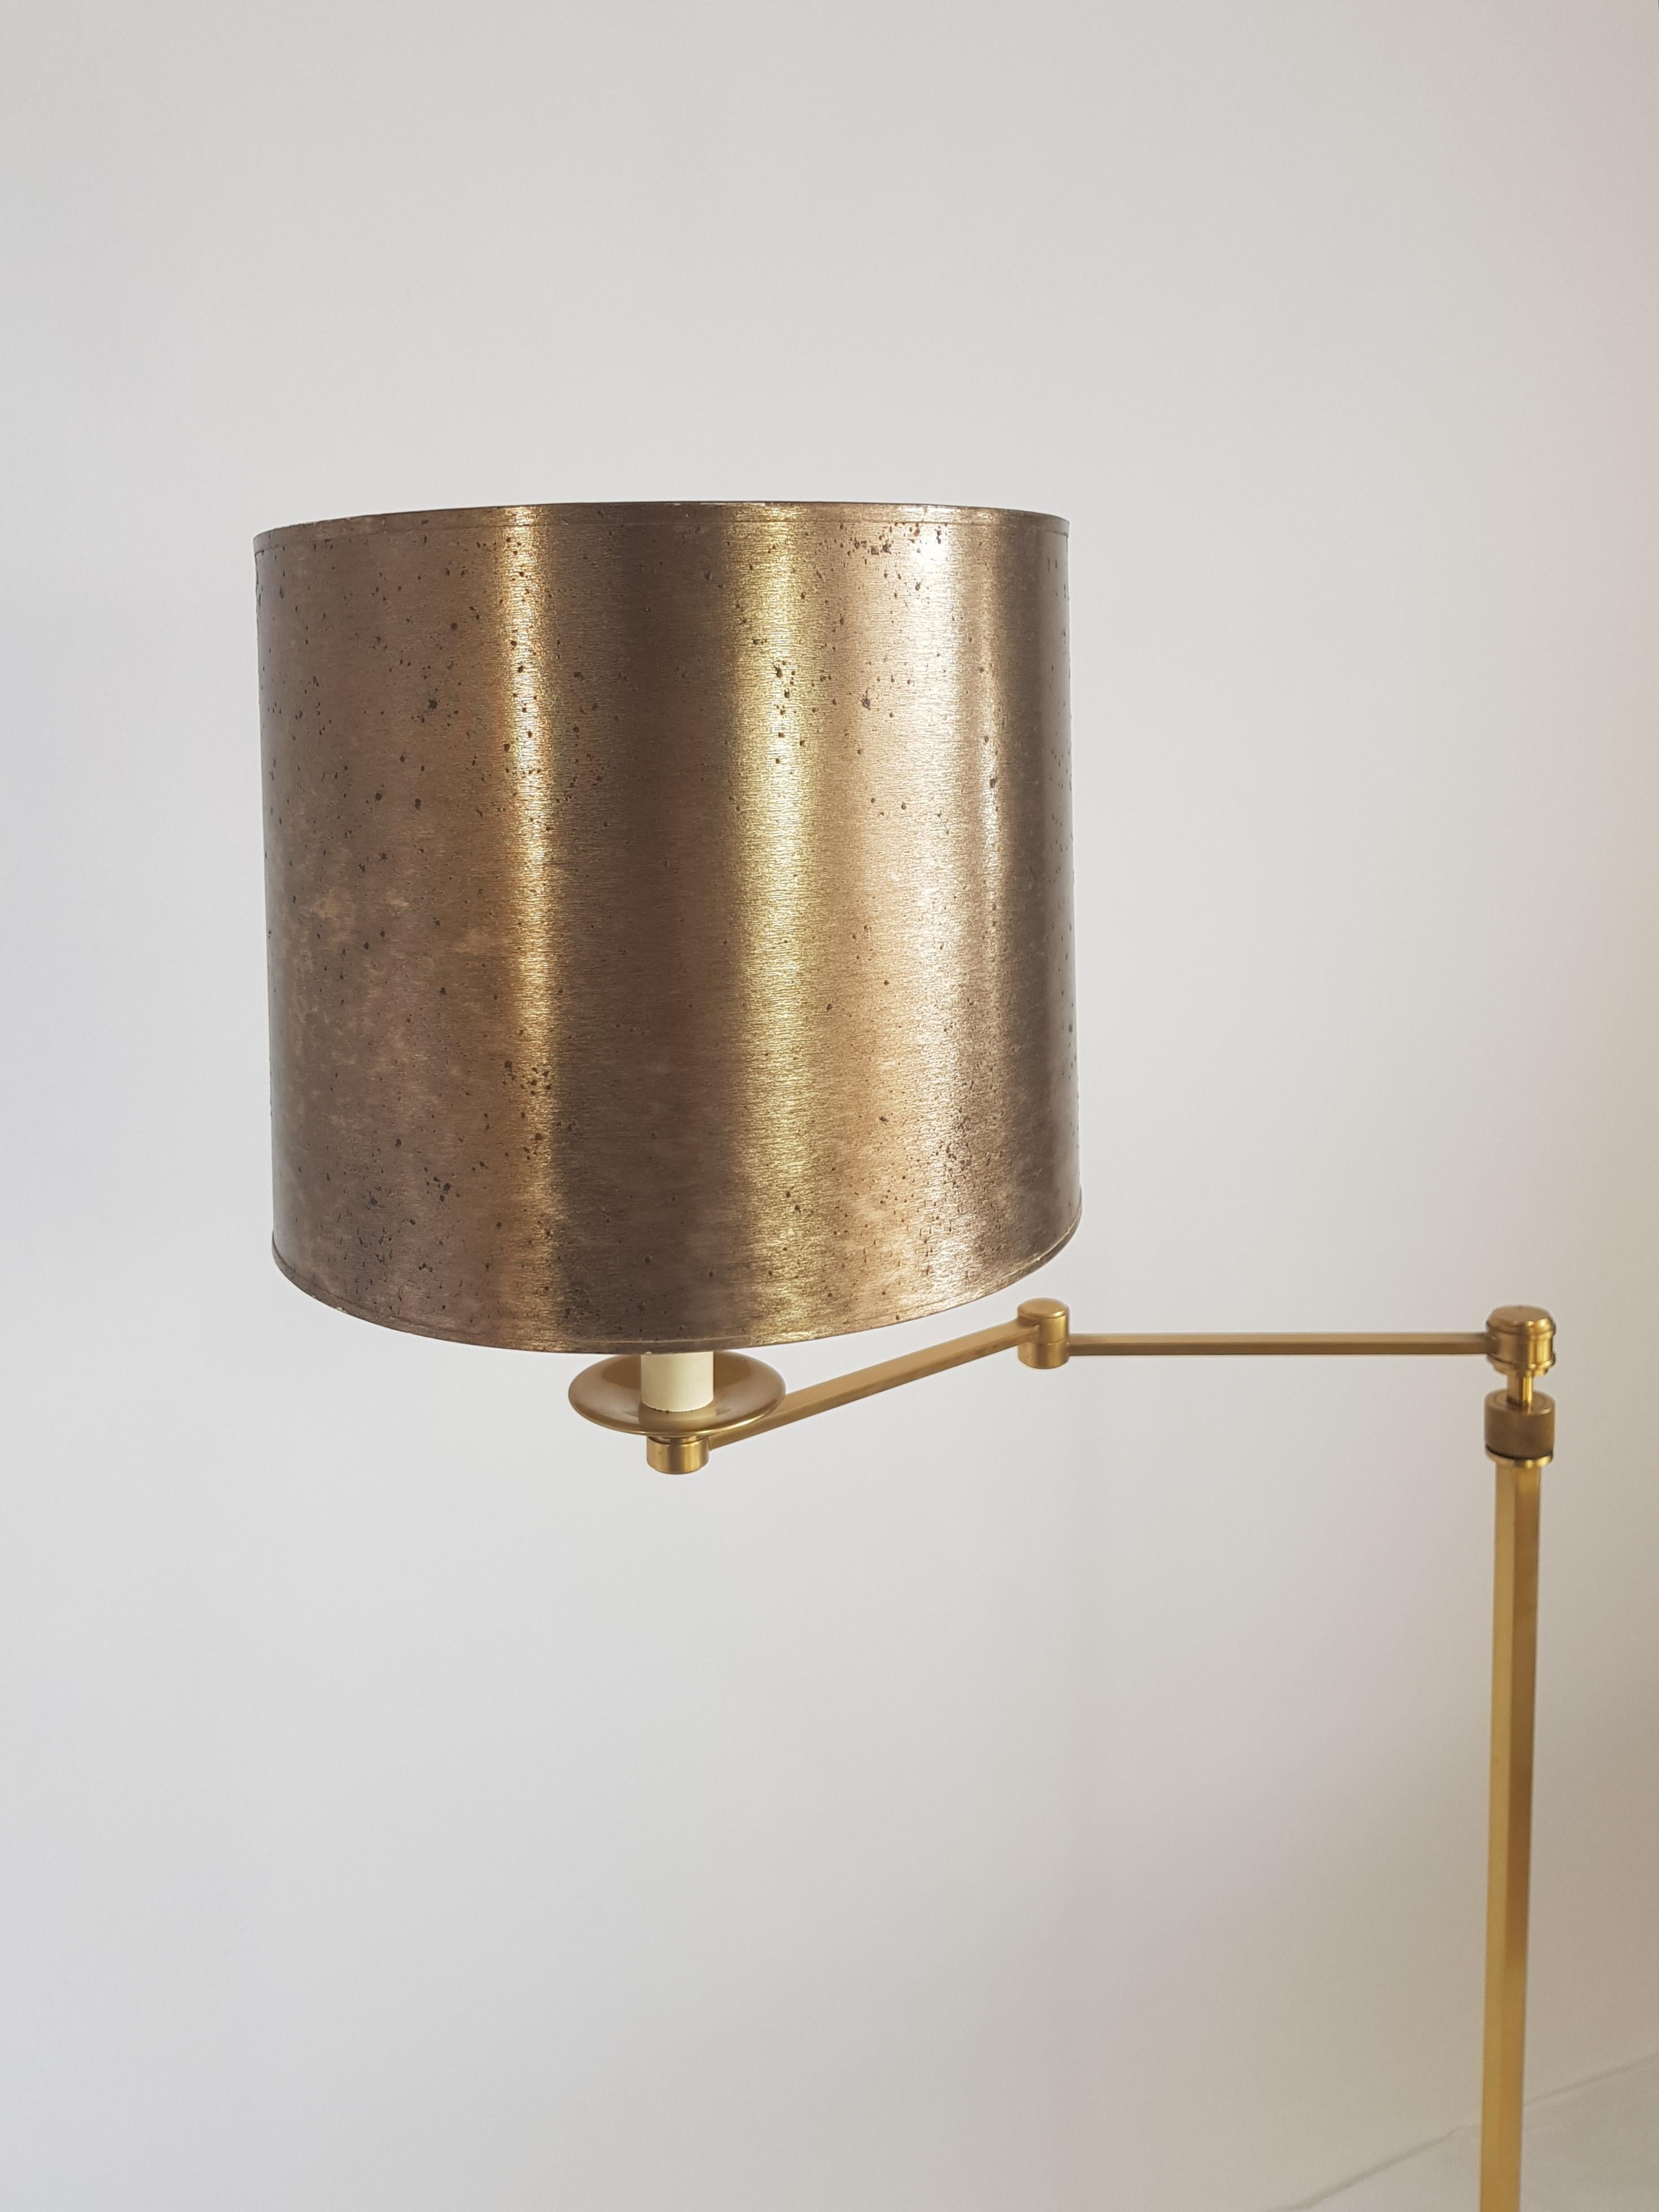 French, Bronze Floor Lamp, Liseuse Maison Bagès, Golden Lampshade, 1970s In Good Condition For Sale In LES LILAS, FR